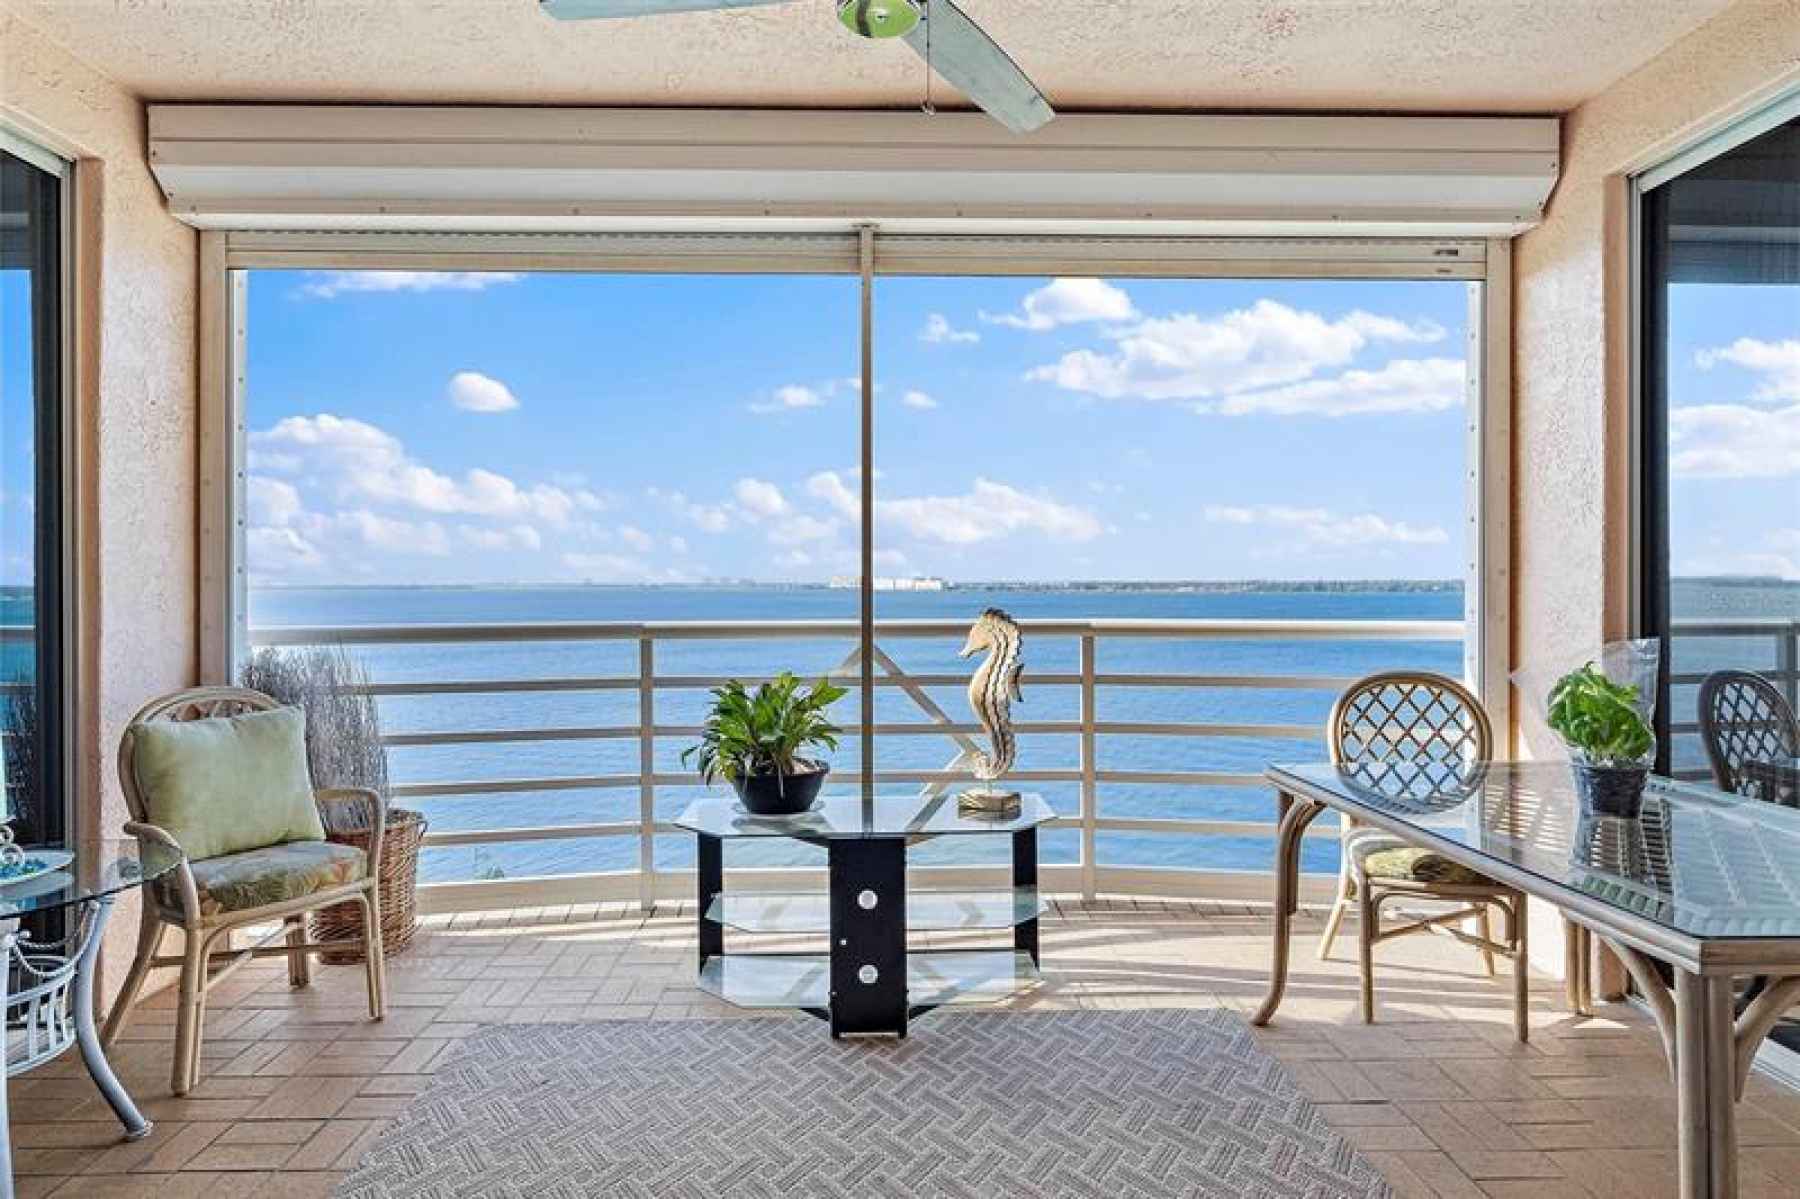 A balcony for lounging and loving life.